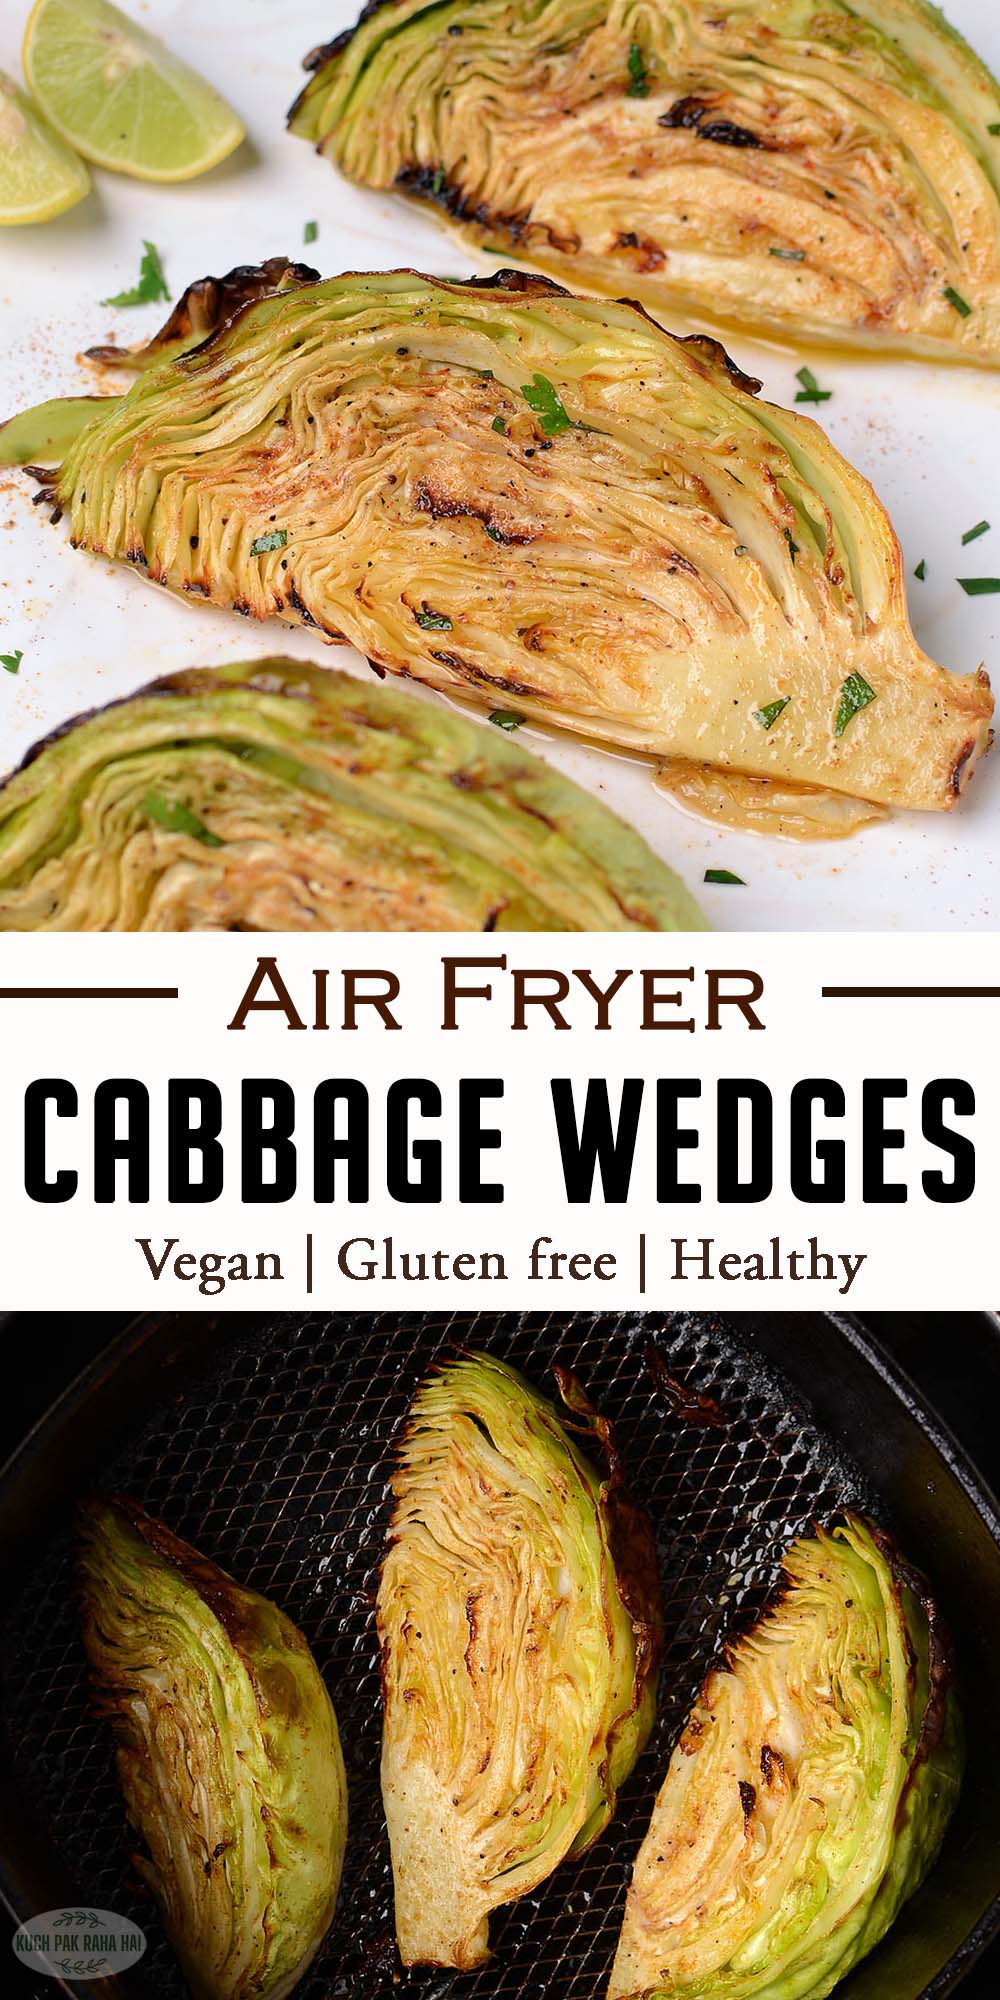 Air fryer cabbage recipes.